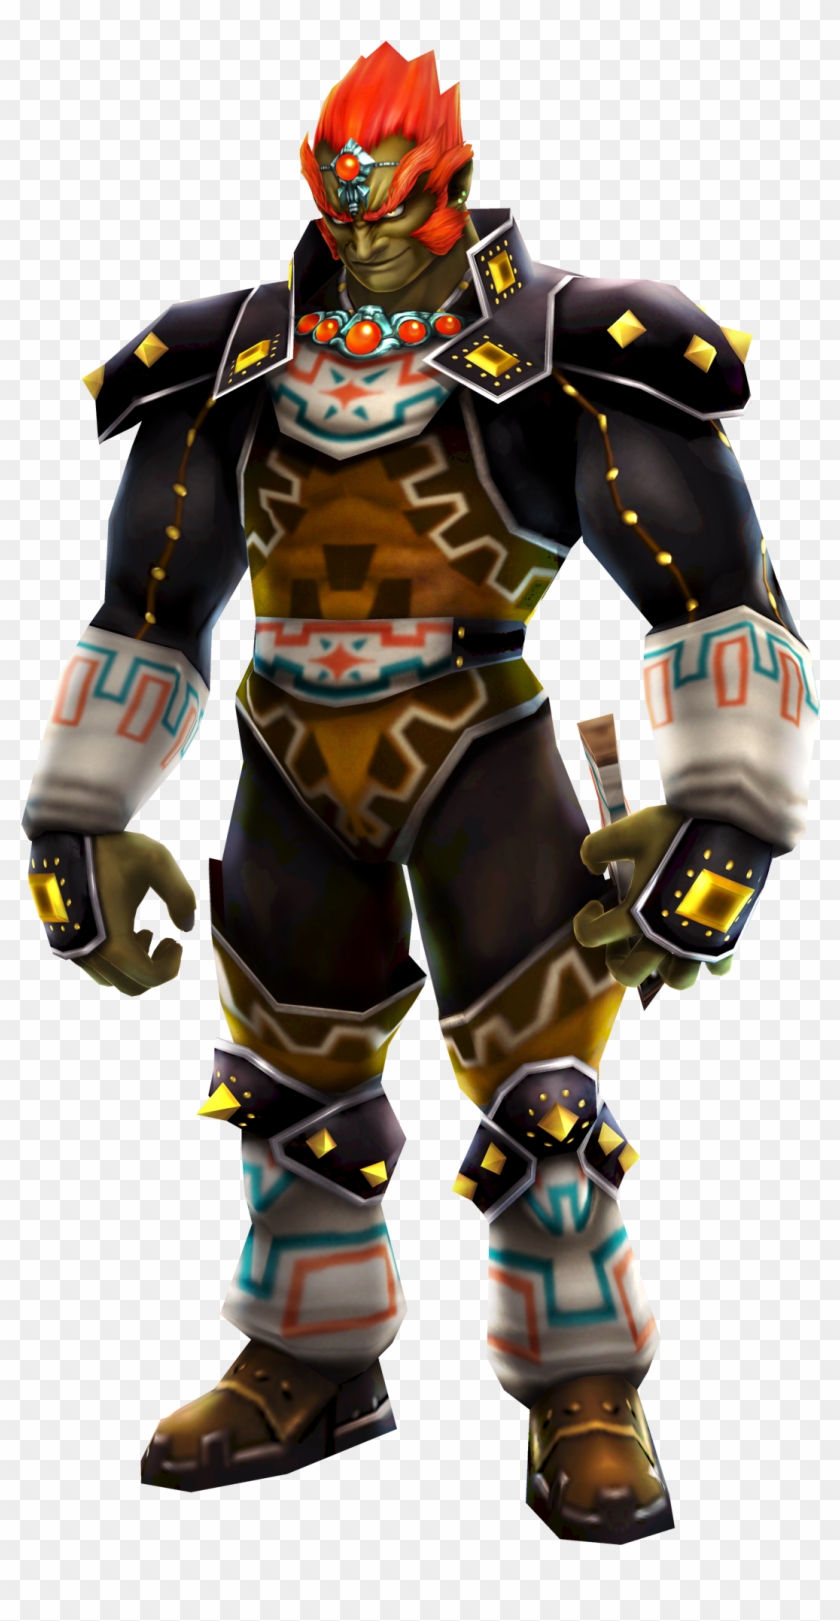 This Time Around I'd Like To Discuss Whether Or Not - Ganondorf Ocarina Of Time Hyrule Warriors Clipart #811953